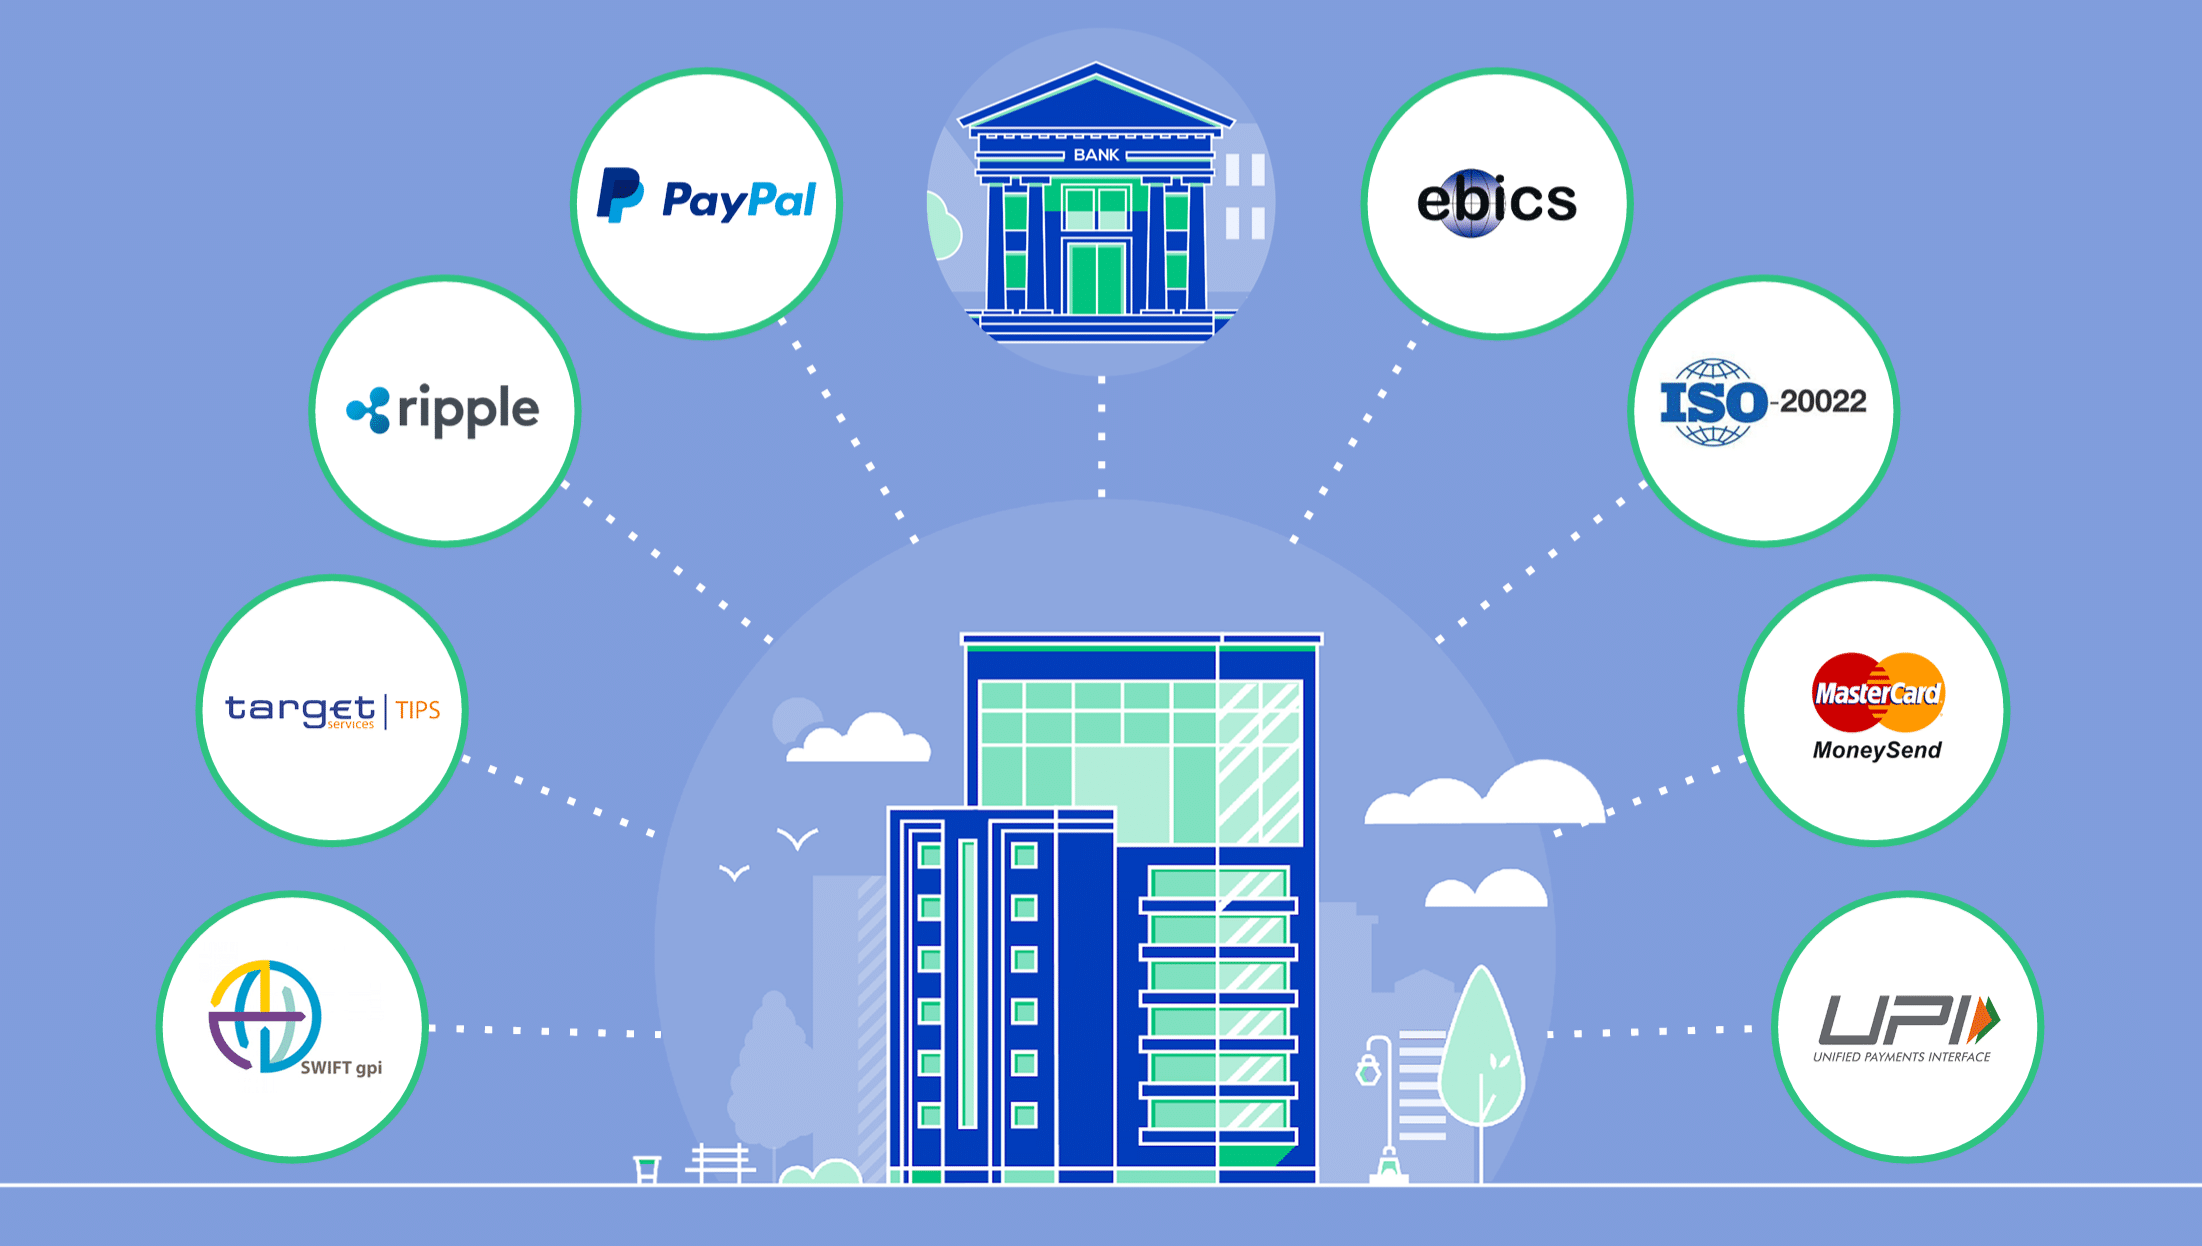 Payment channels available to corporate via bank connectivity options